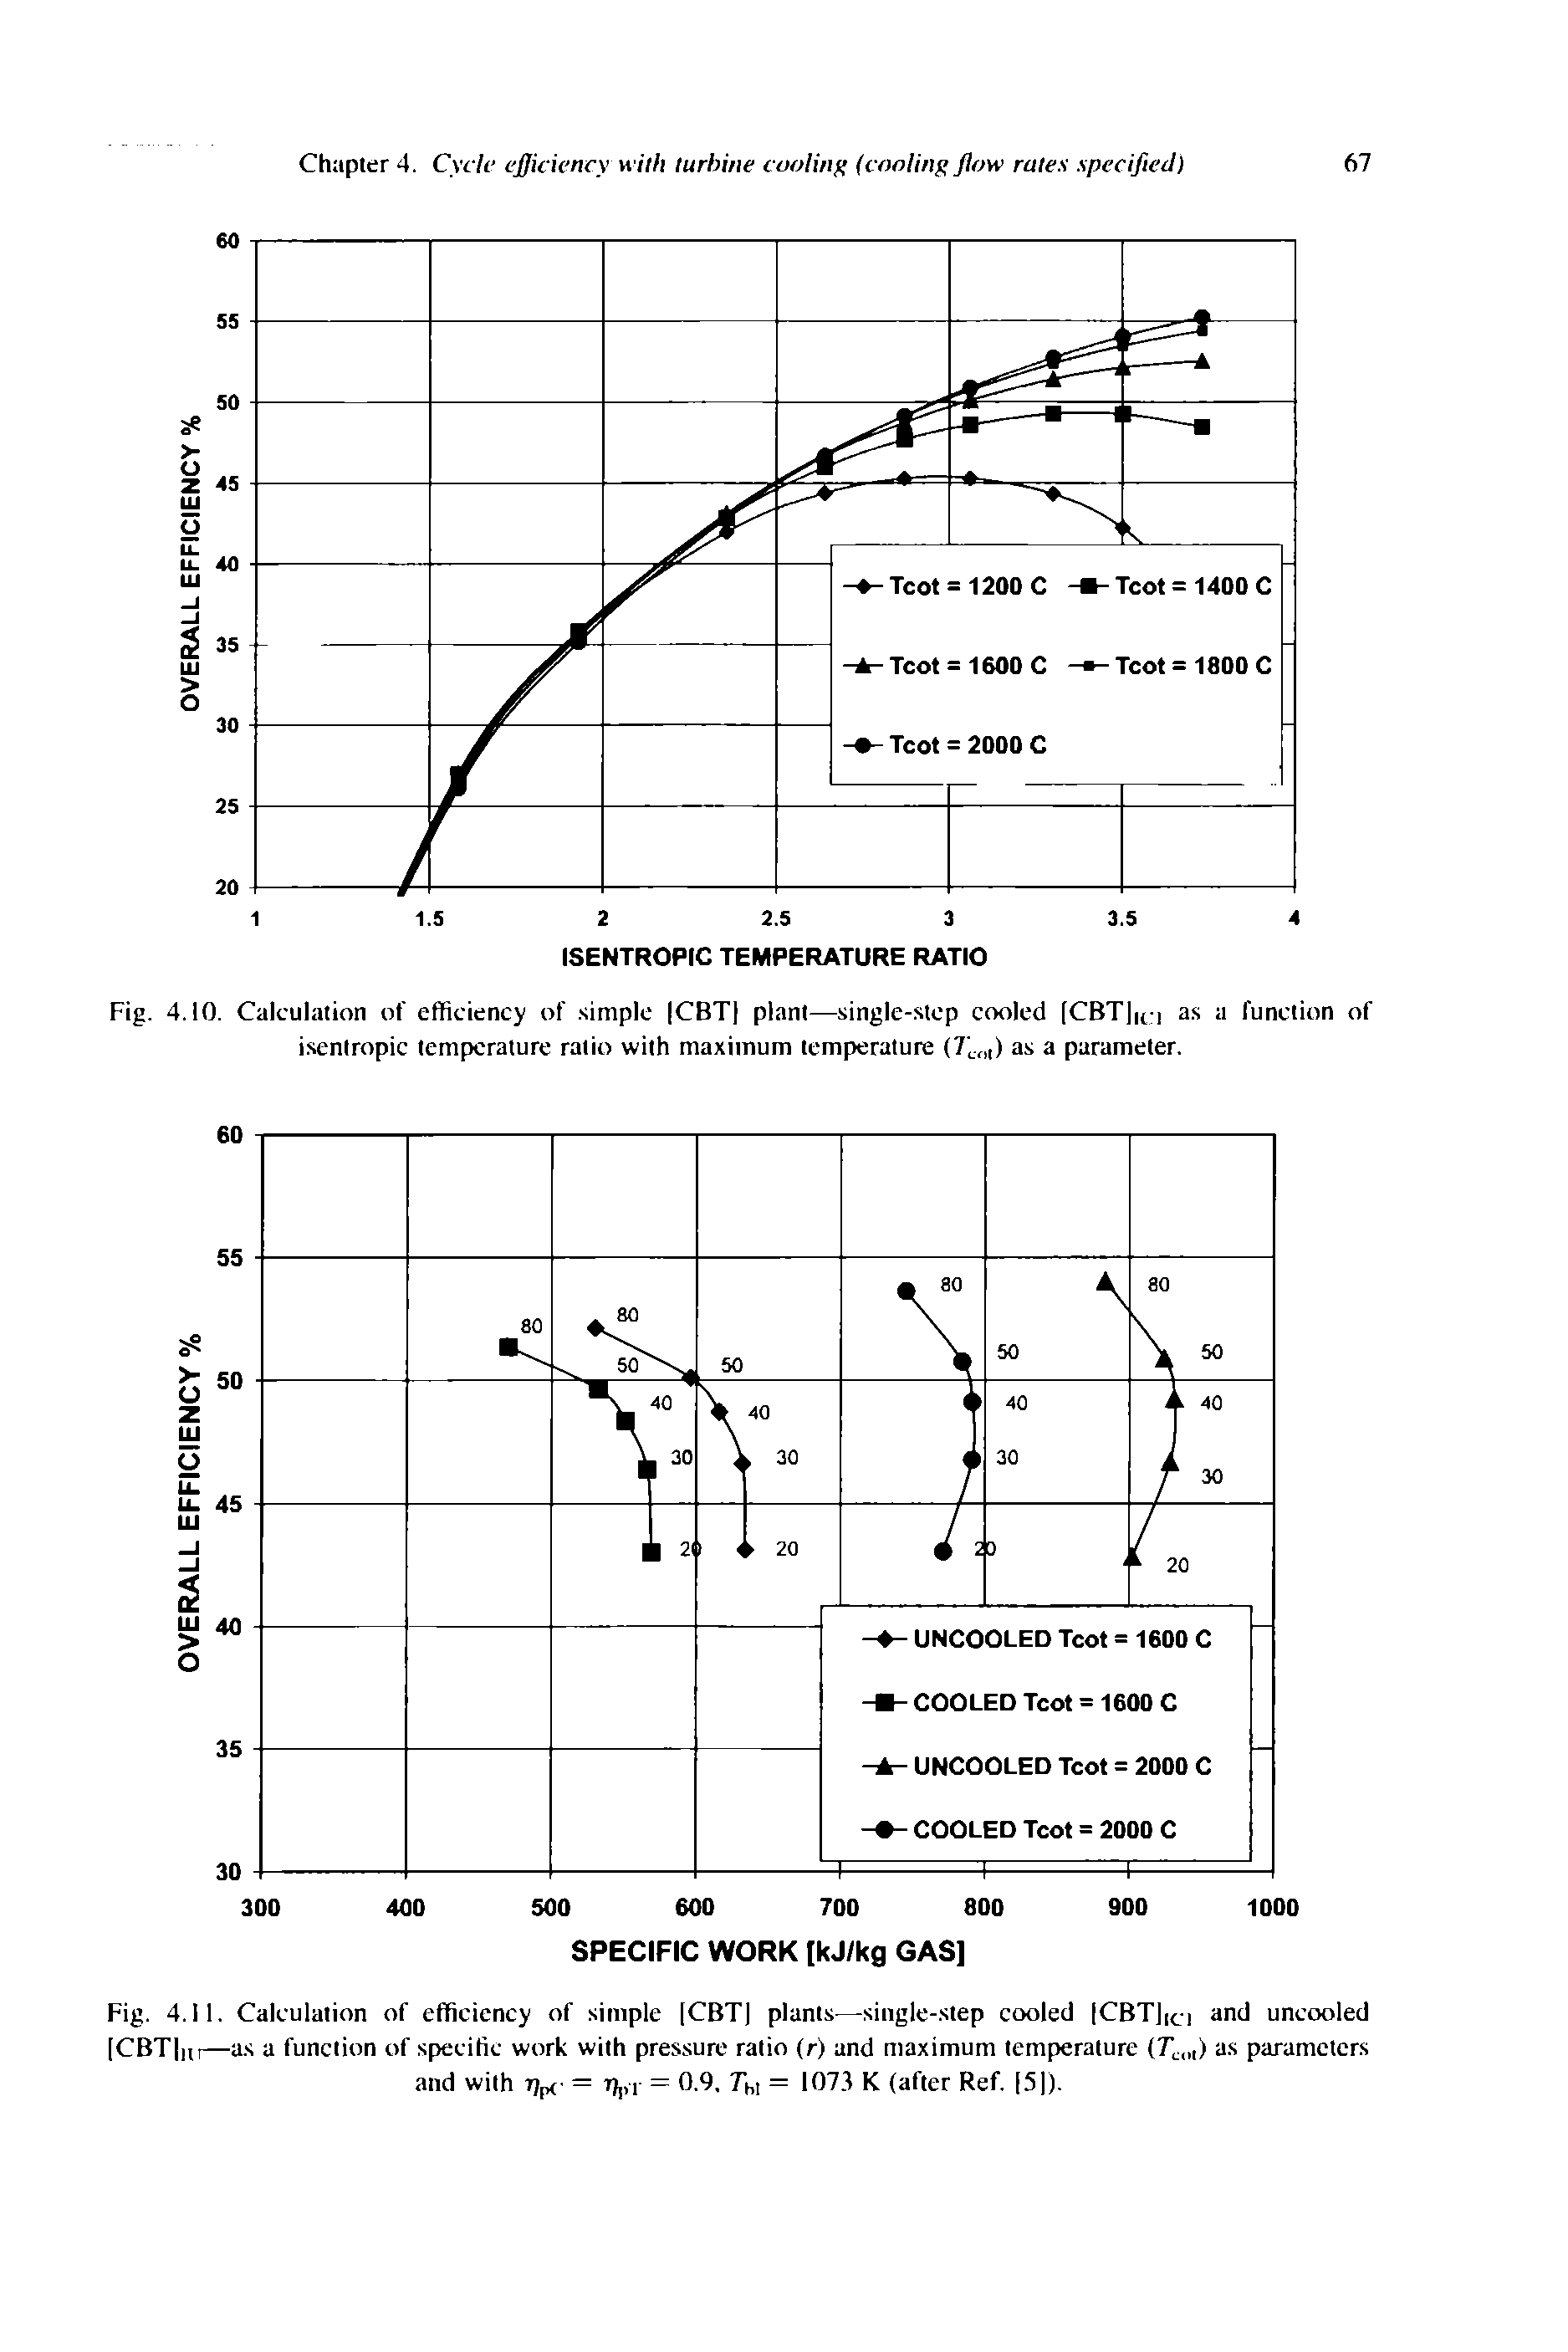 Fig. 4.10. Calculation of efficiency of. -iimple CBT plant—single-step cooled [CBT n ] as a function of iseniropic temperature ratio with maximum temperature (7 ) as a parameter.